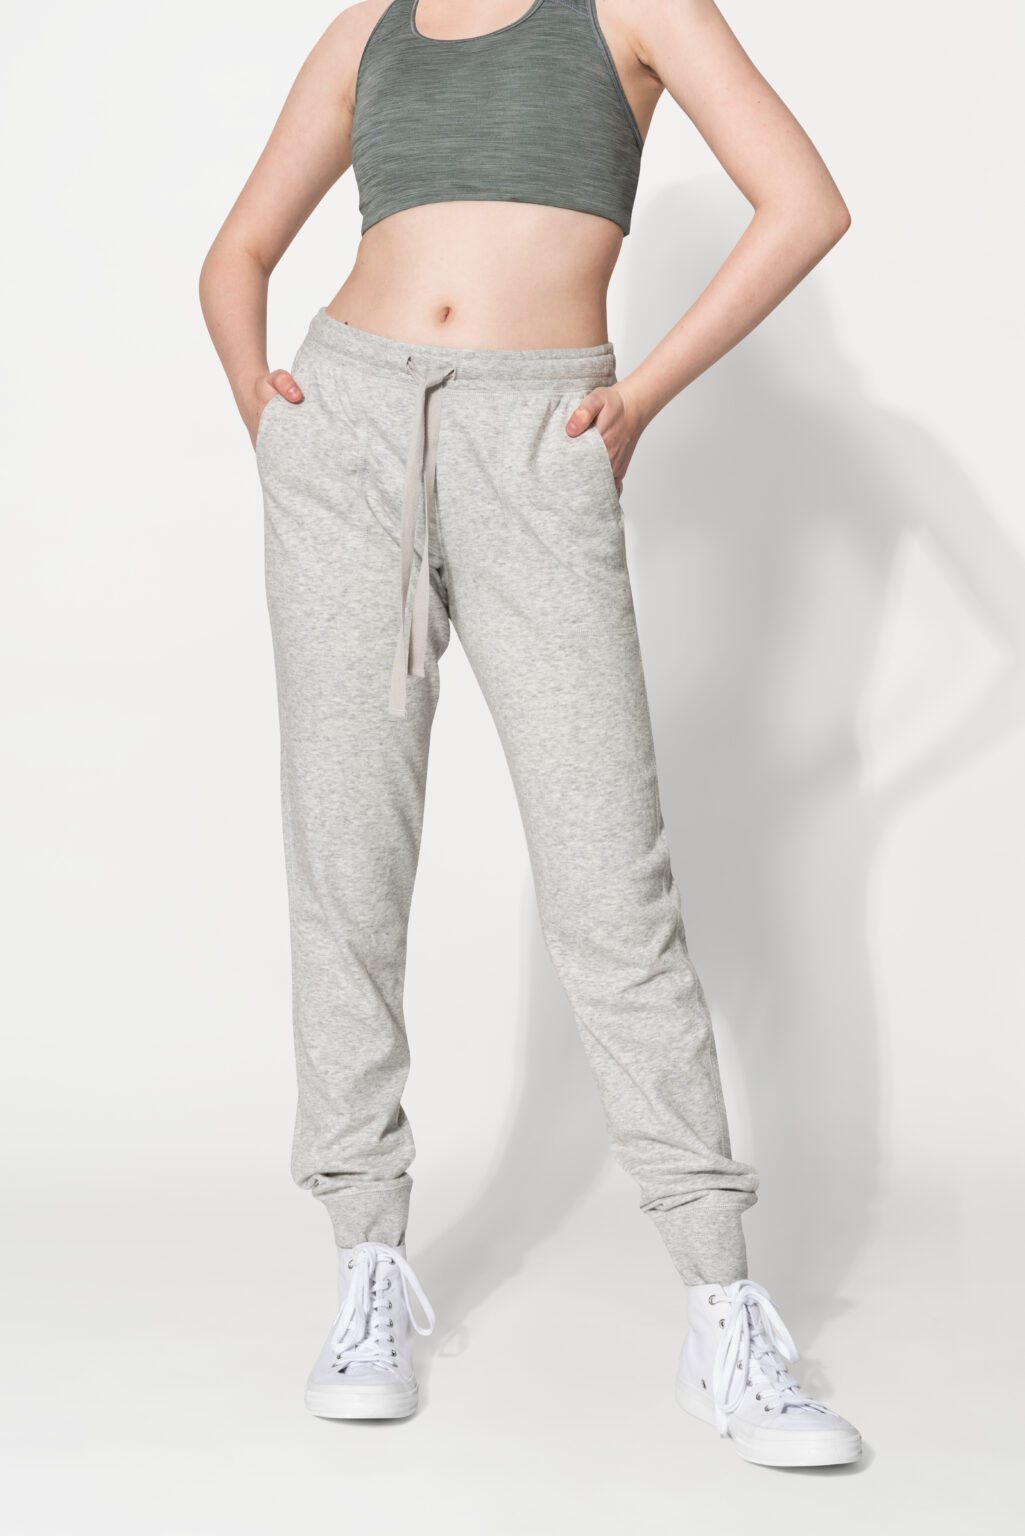 The History Of Sweatpants - From Track To Catwalk | So Sew Easy